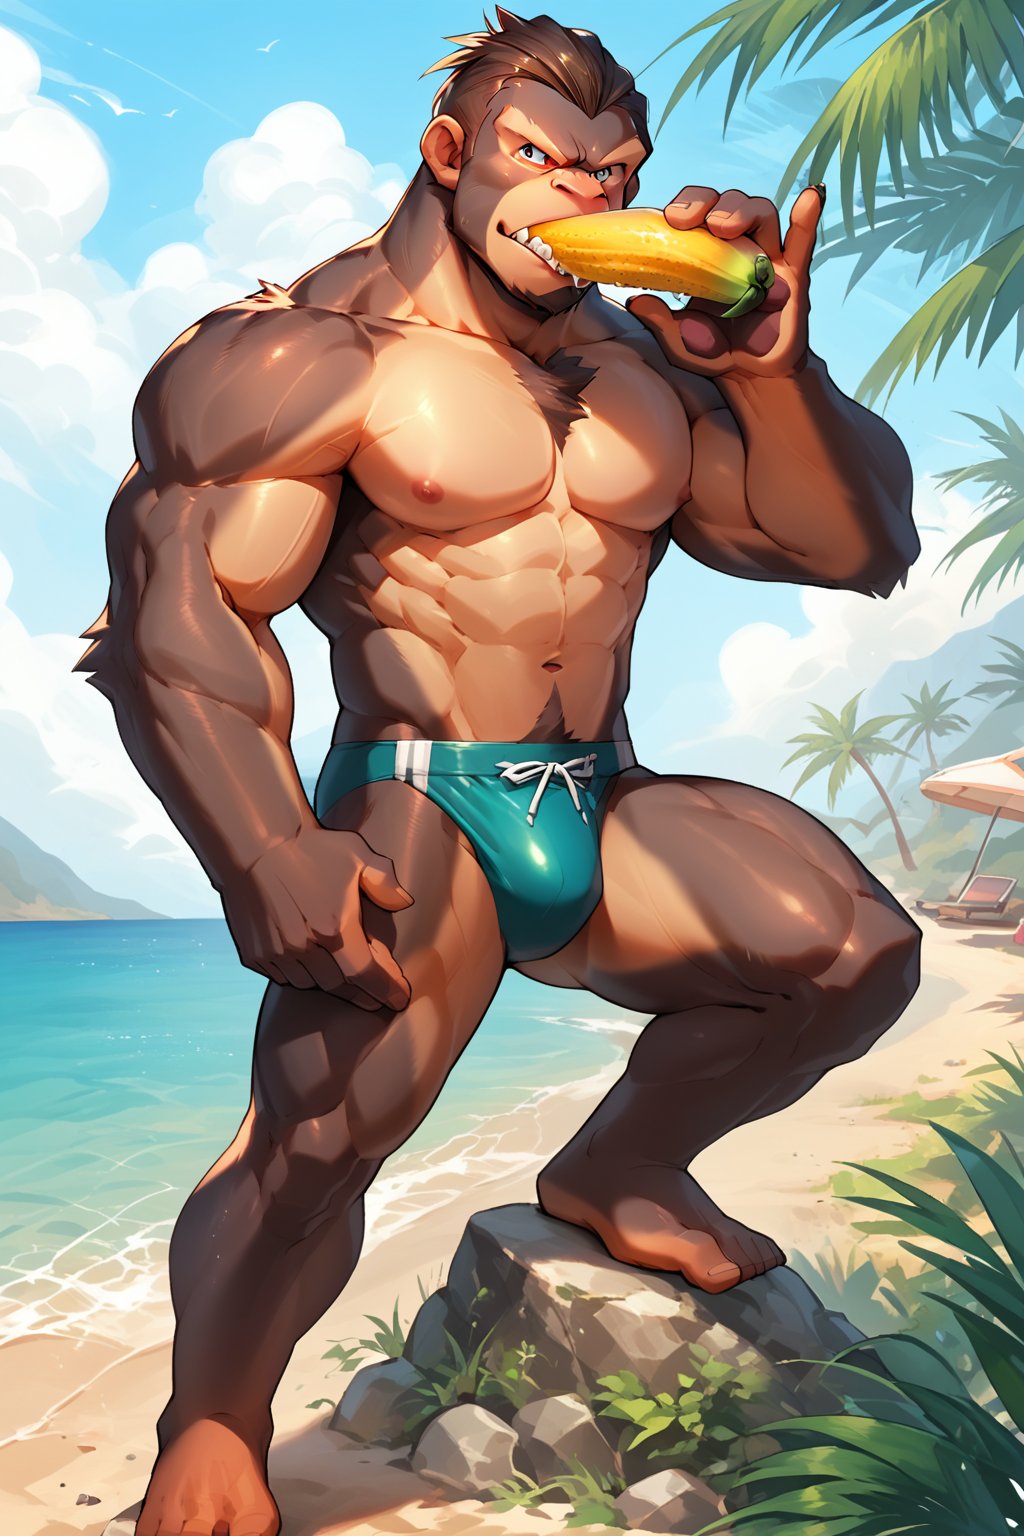 score_9, score_8_up, score_7_up, score_6_up, score_5_up, source_anime, male focus, solo, toned_male, muscle, looking_at_viewer, full body, pkmn_swim, Beach, palm_tree, bananas, eating, furry leg, furry arms, furry chest, gorilla, 